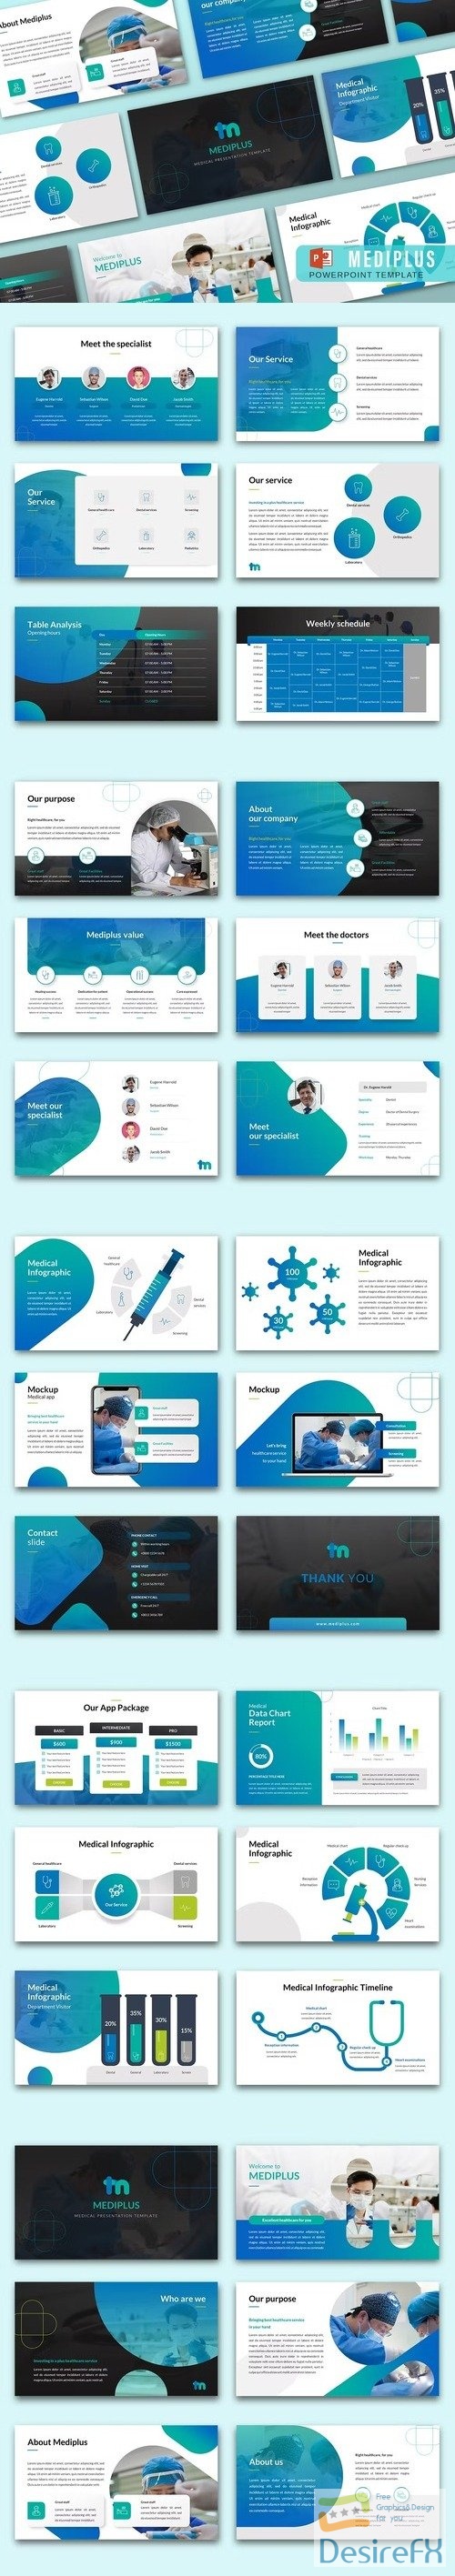 MEDIPLUS – Medical PowerPoint Template